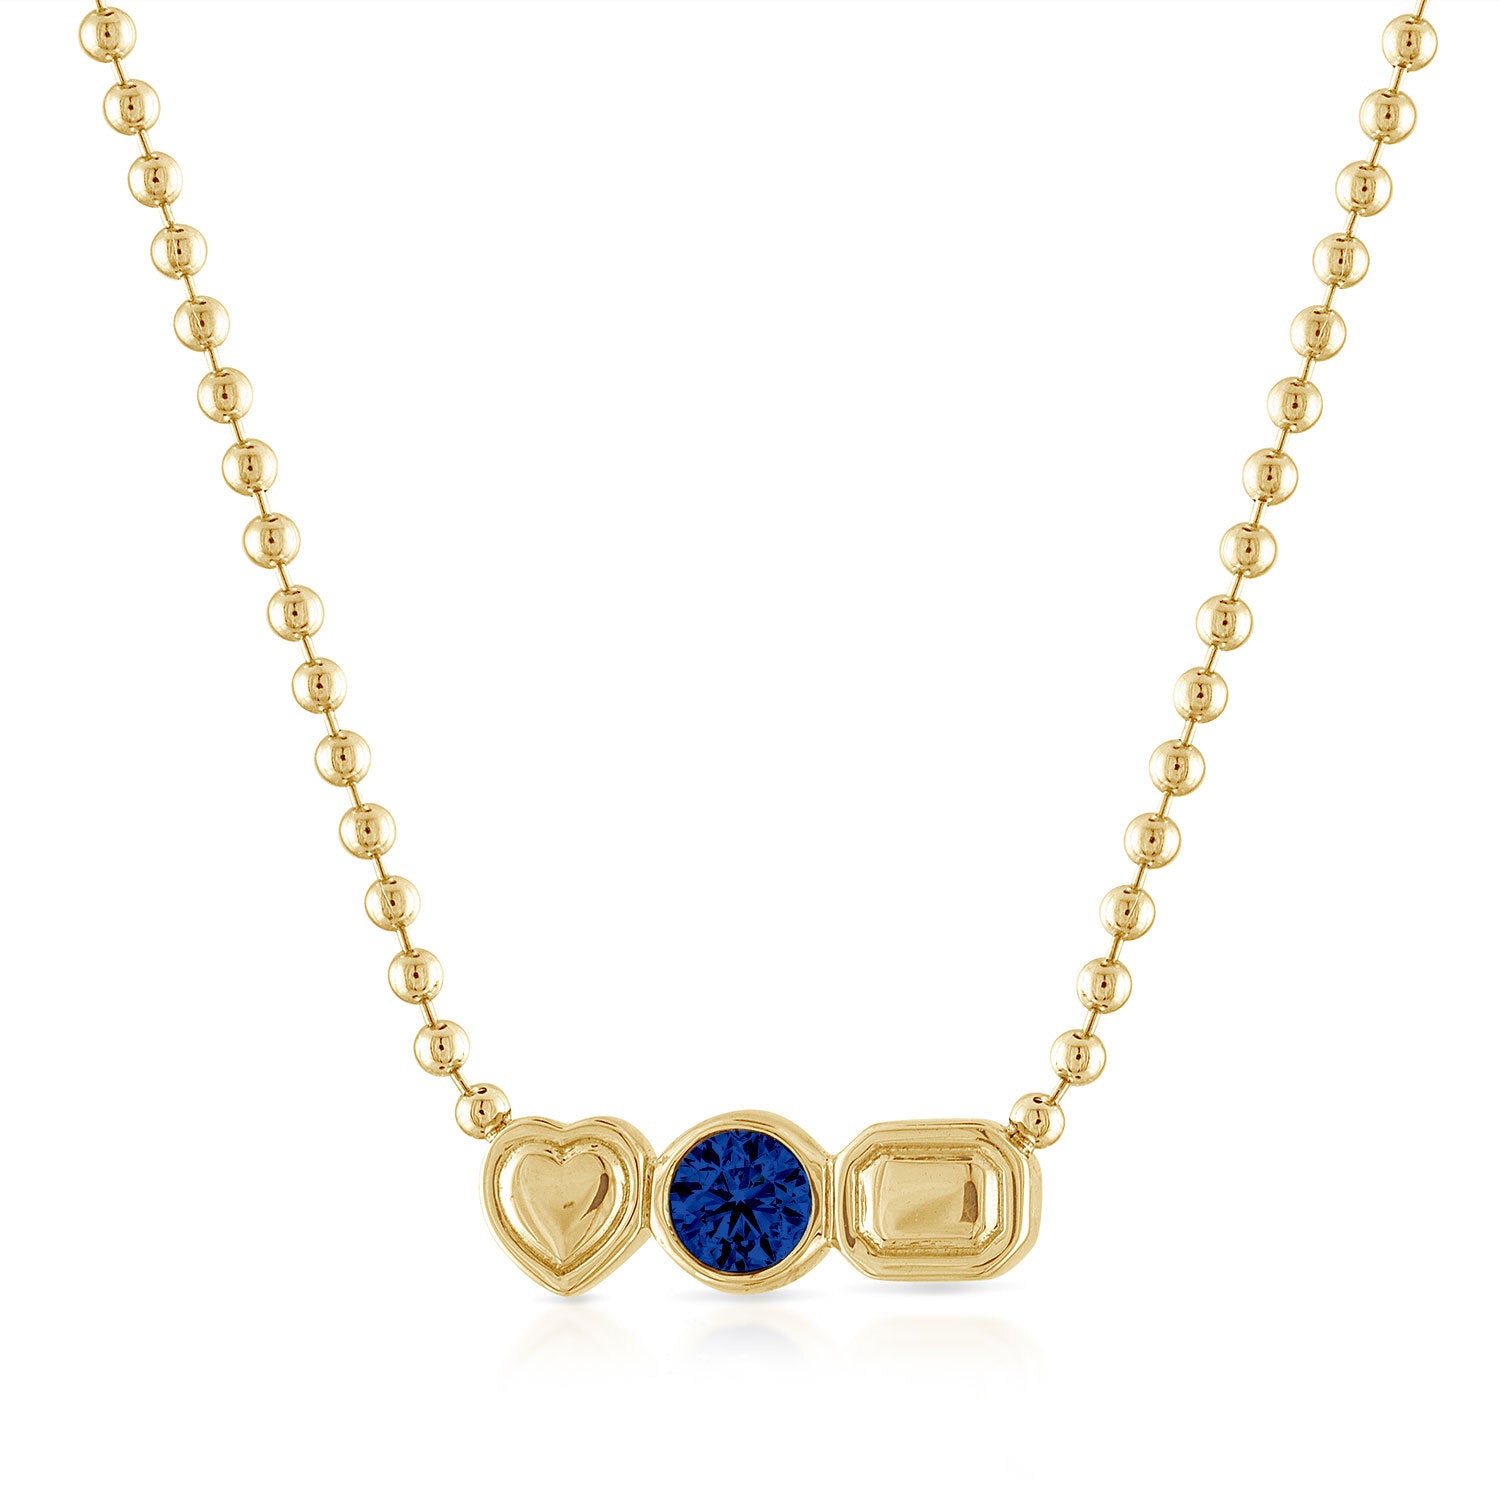 Fancy Bezel Gold and Birthstone Necklace